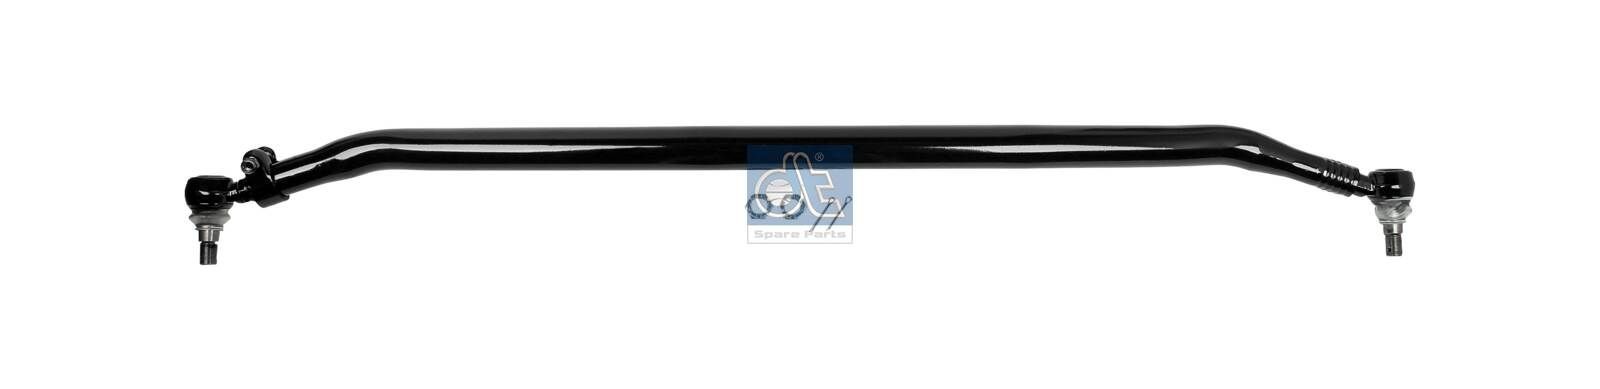 DT Spare Parts 2.53046 Rod Assembly 20 587 731